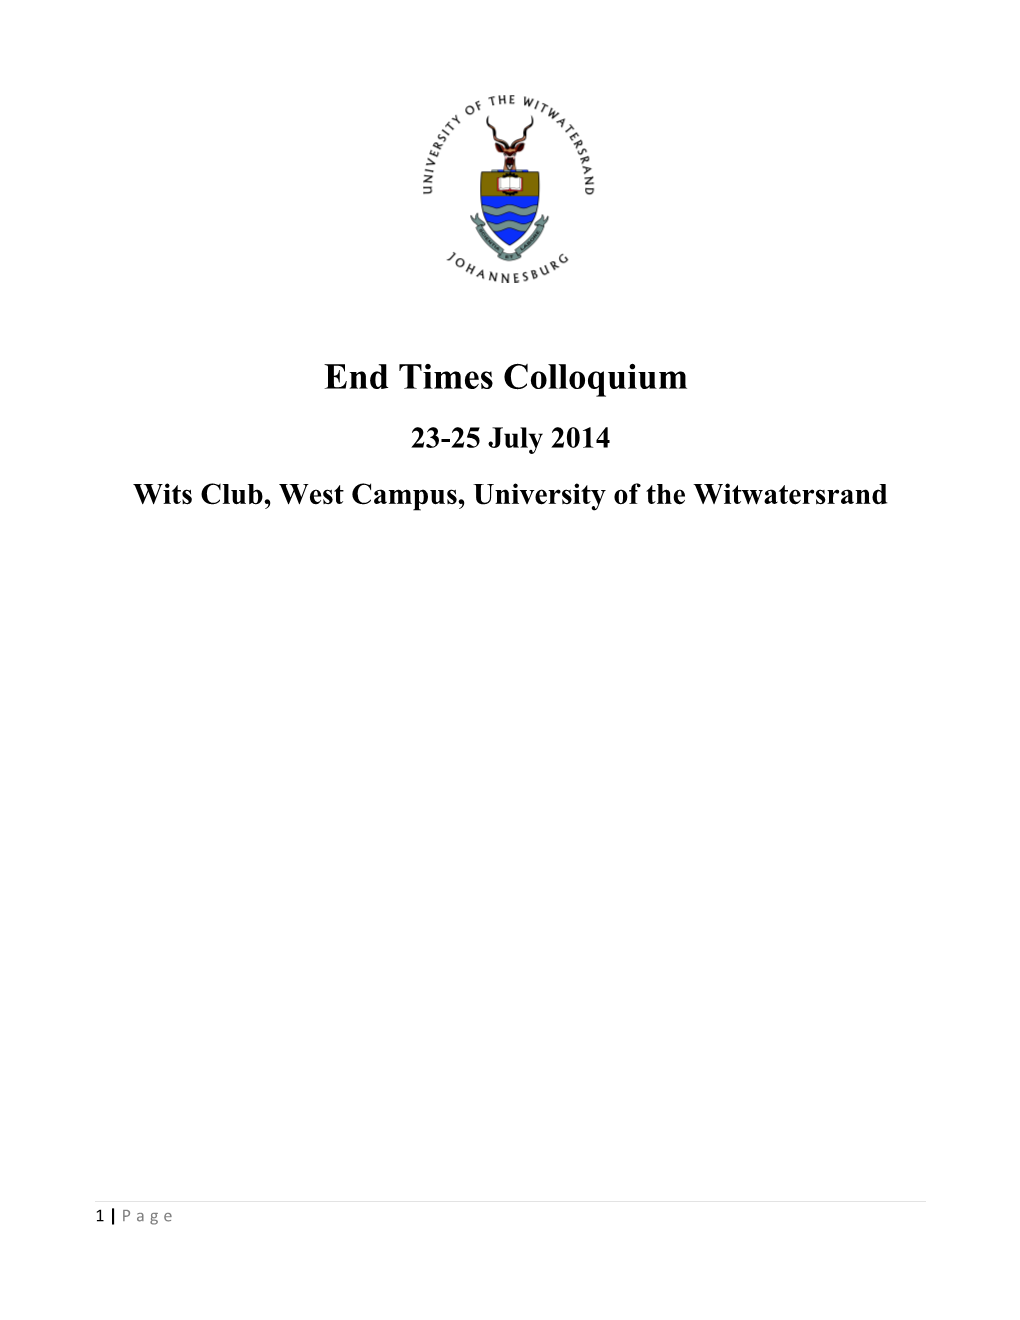 Wits Club, West Campus, University of the Witwatersrand